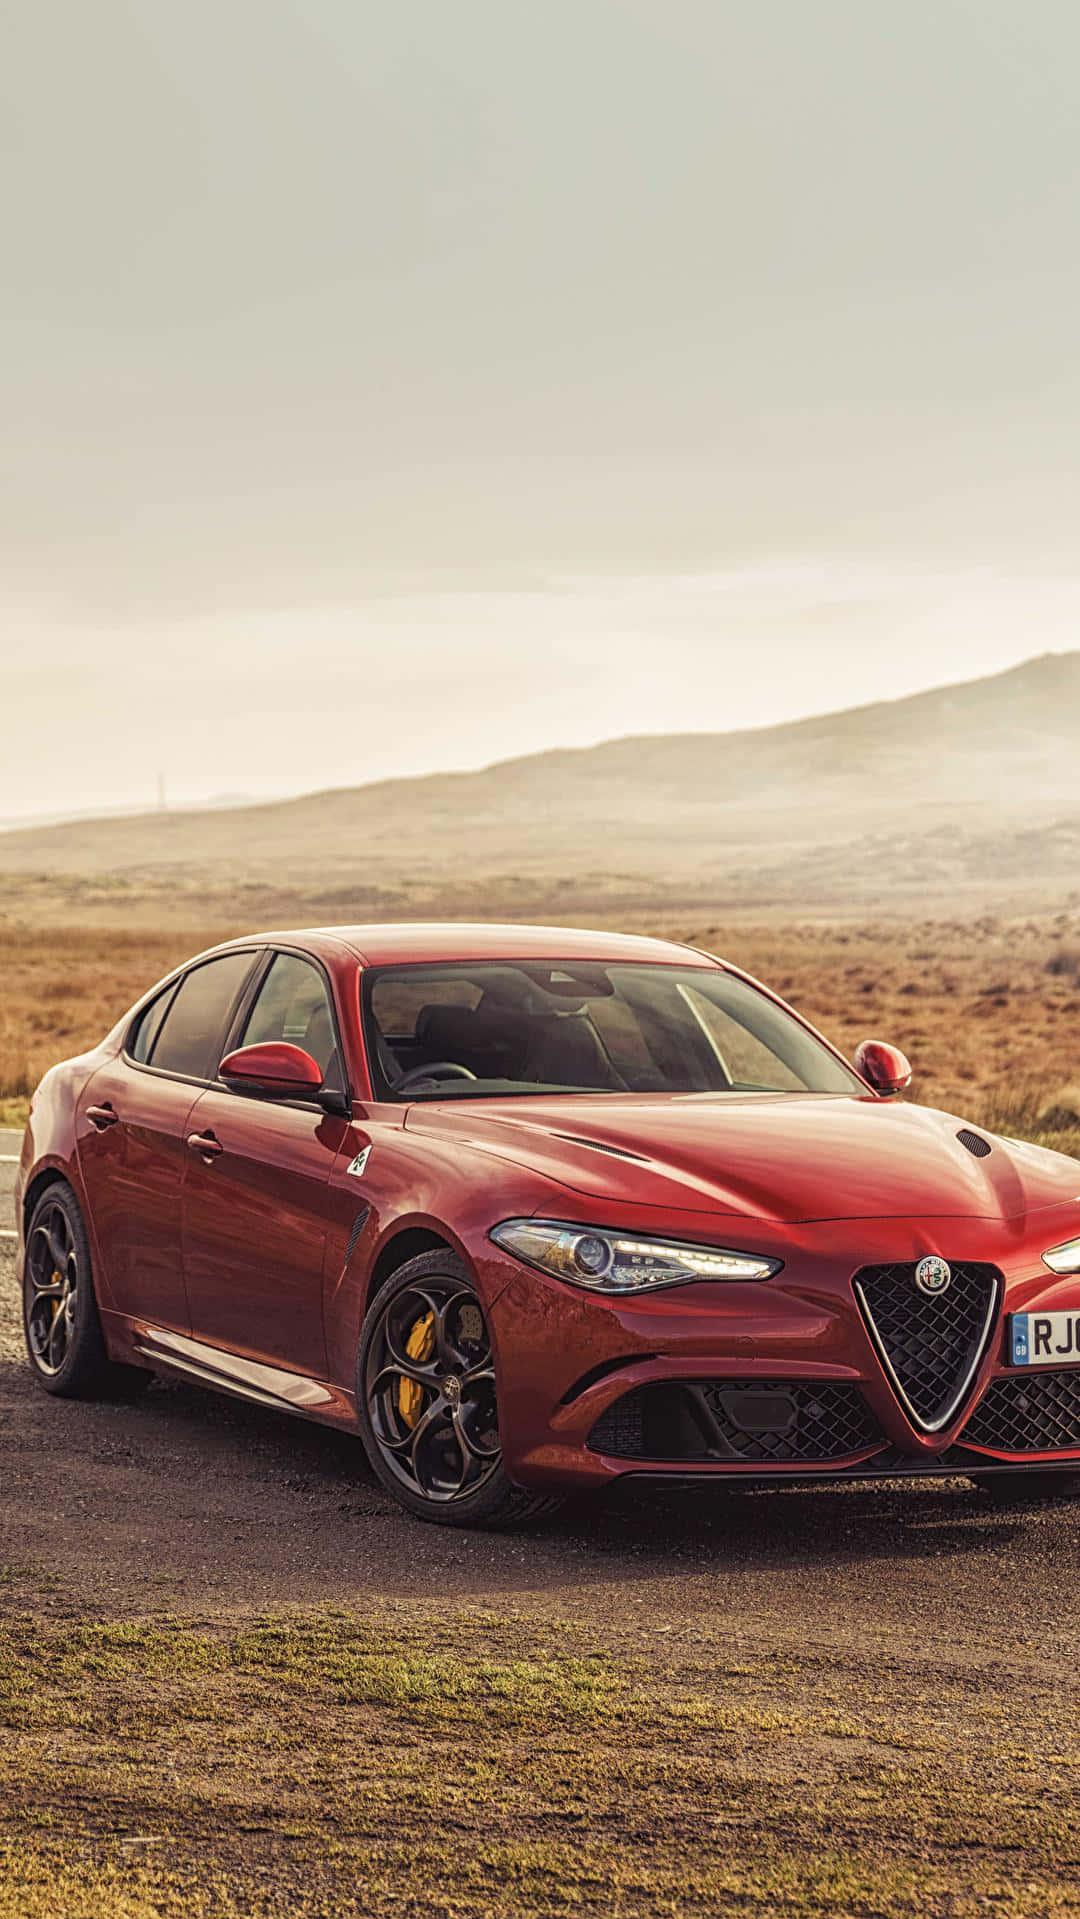 Download Cruise in Style with an Alfa Romeo